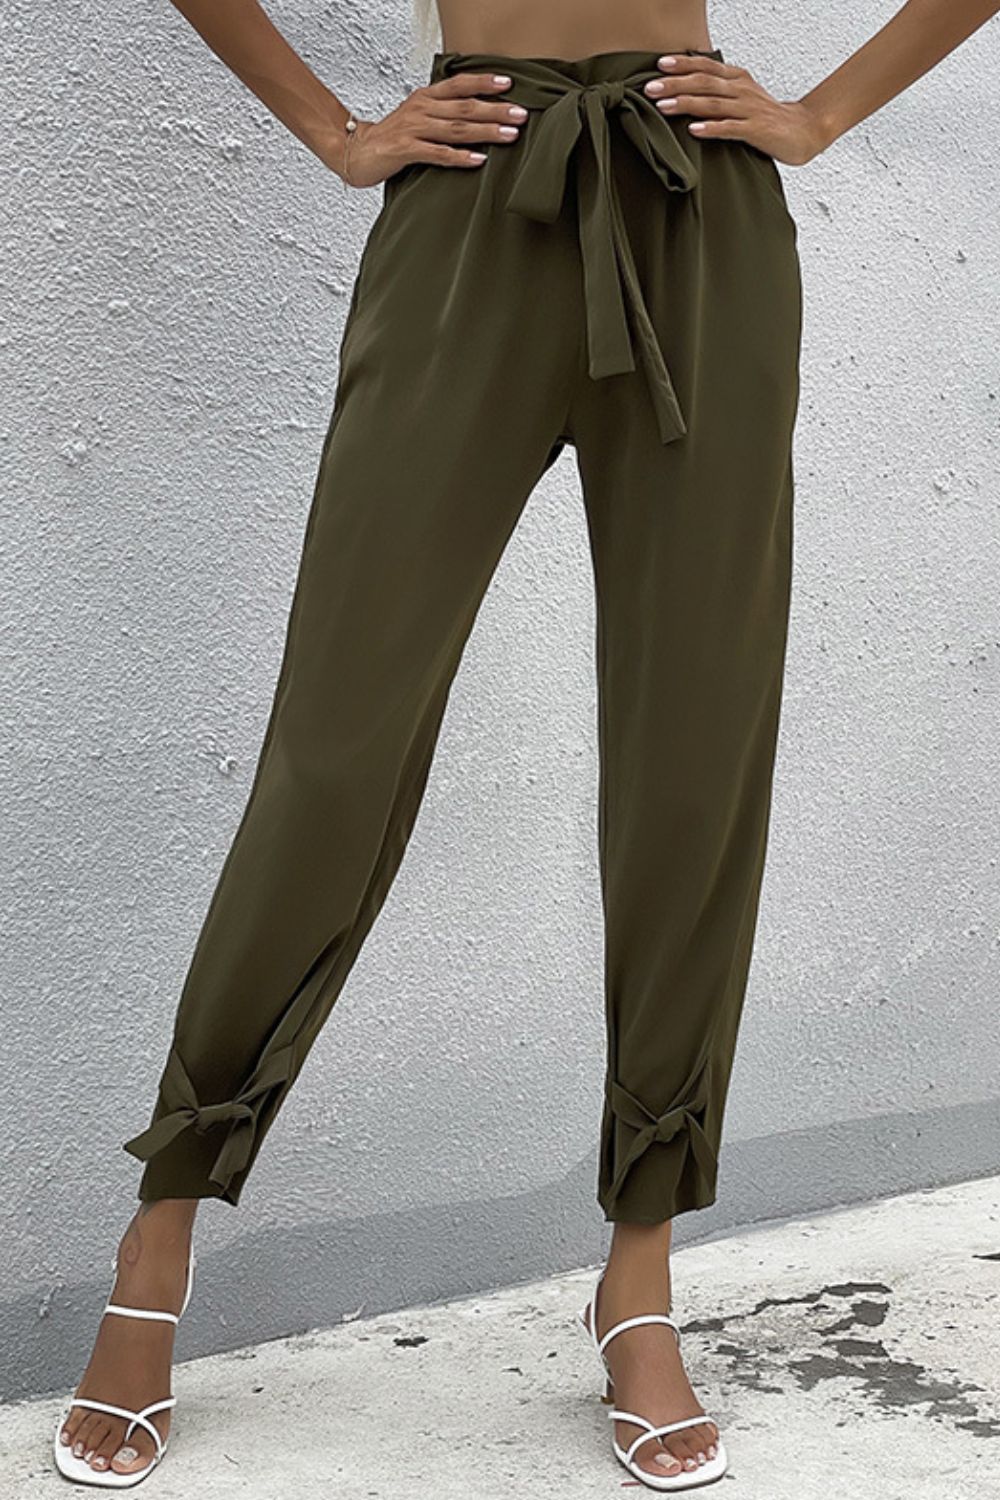 Tie Detail Belted Pants with Pockets - Pants - FITGGINS